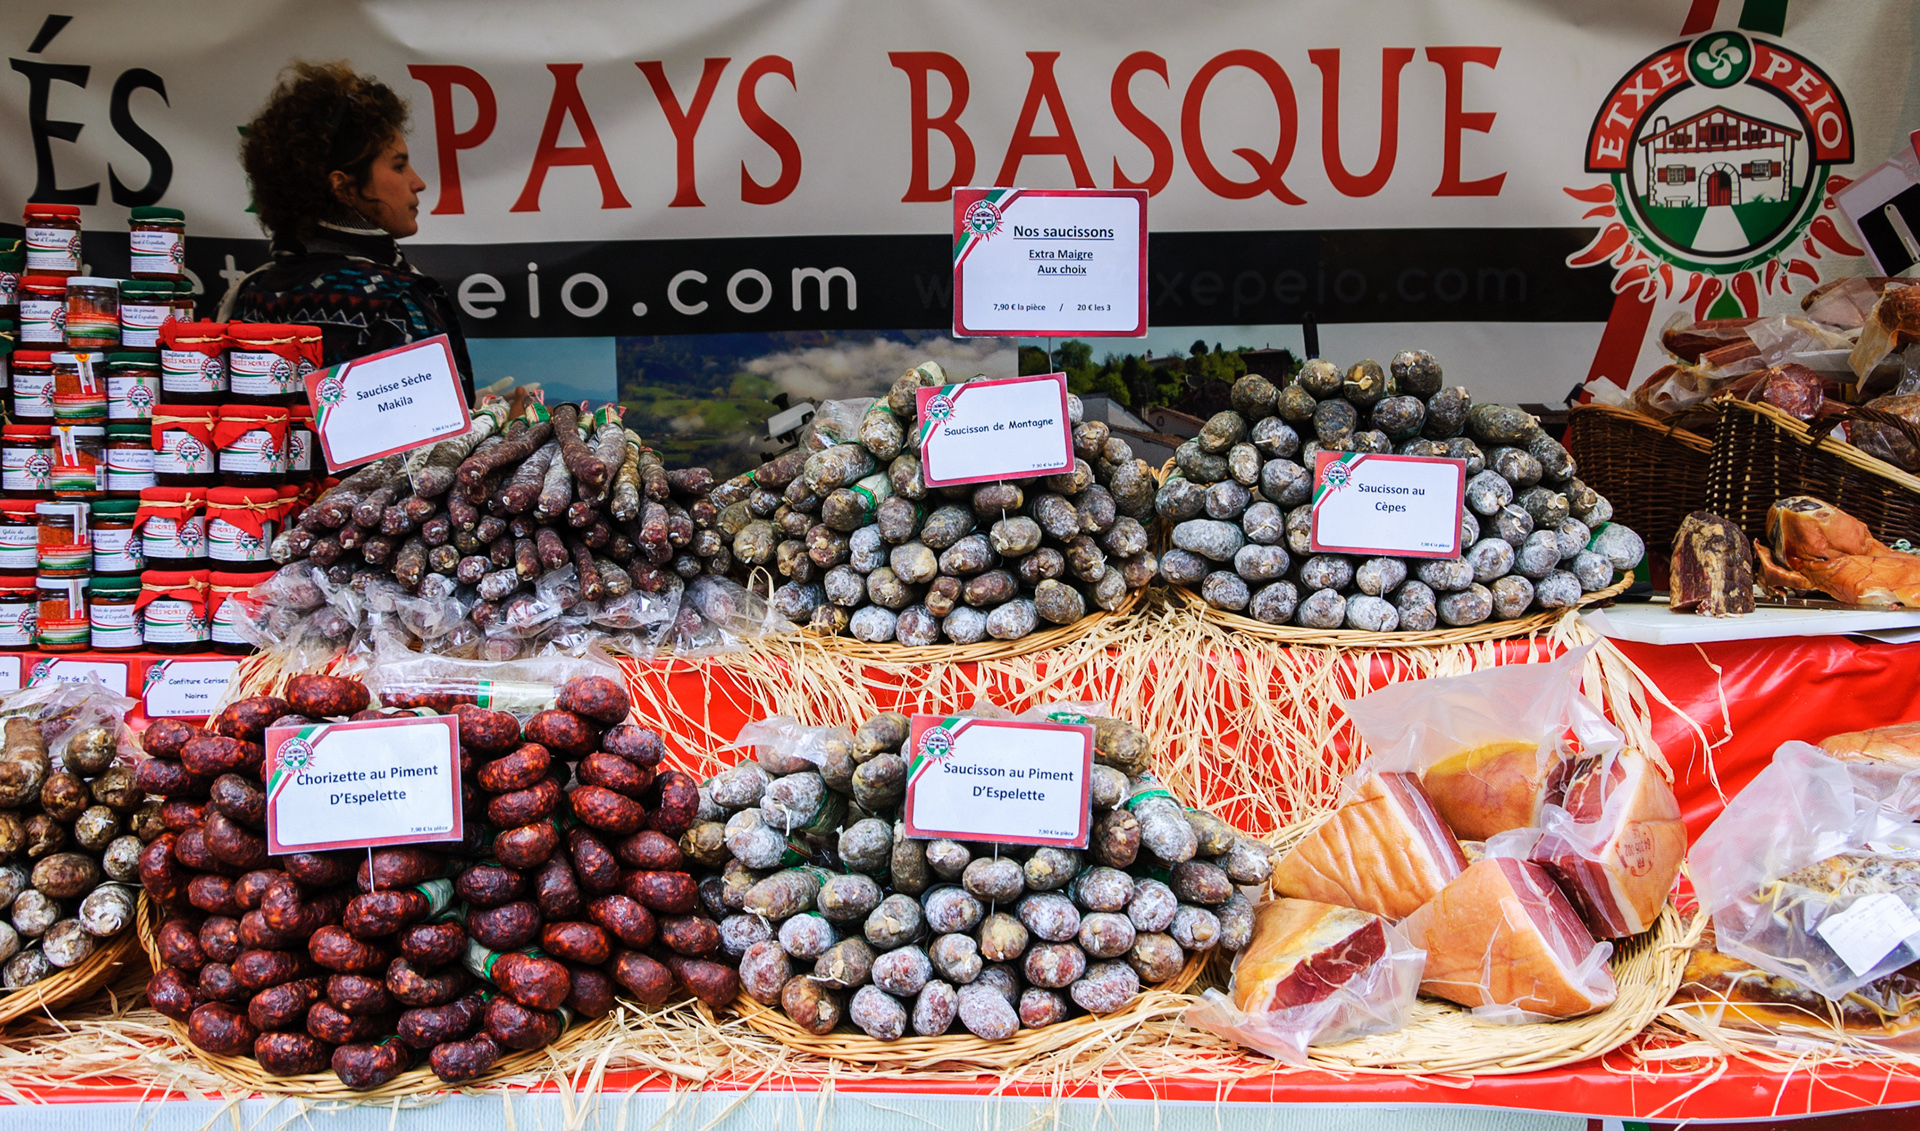 A Trip to Basque Country